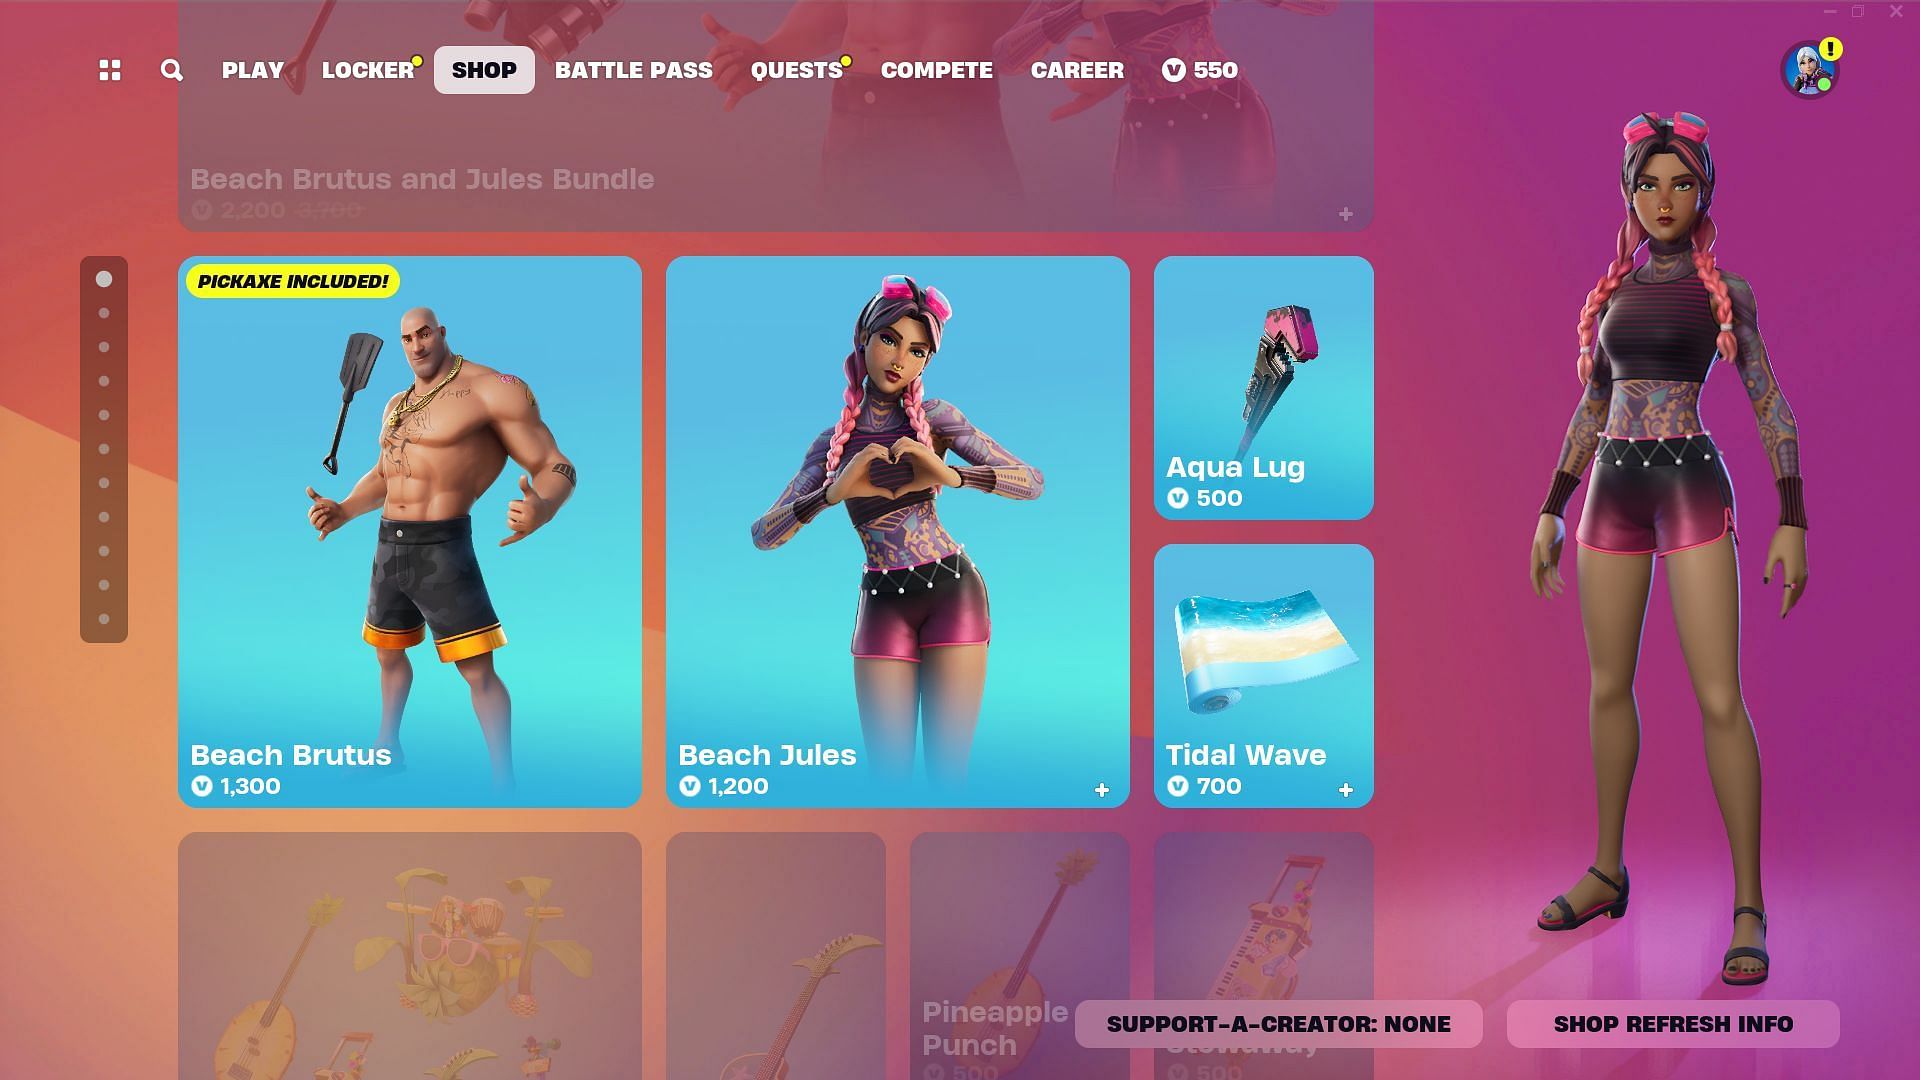 Beach Brutus and Beach Jules skin in Fortnite can be purchased separately (Image via Epic Games)